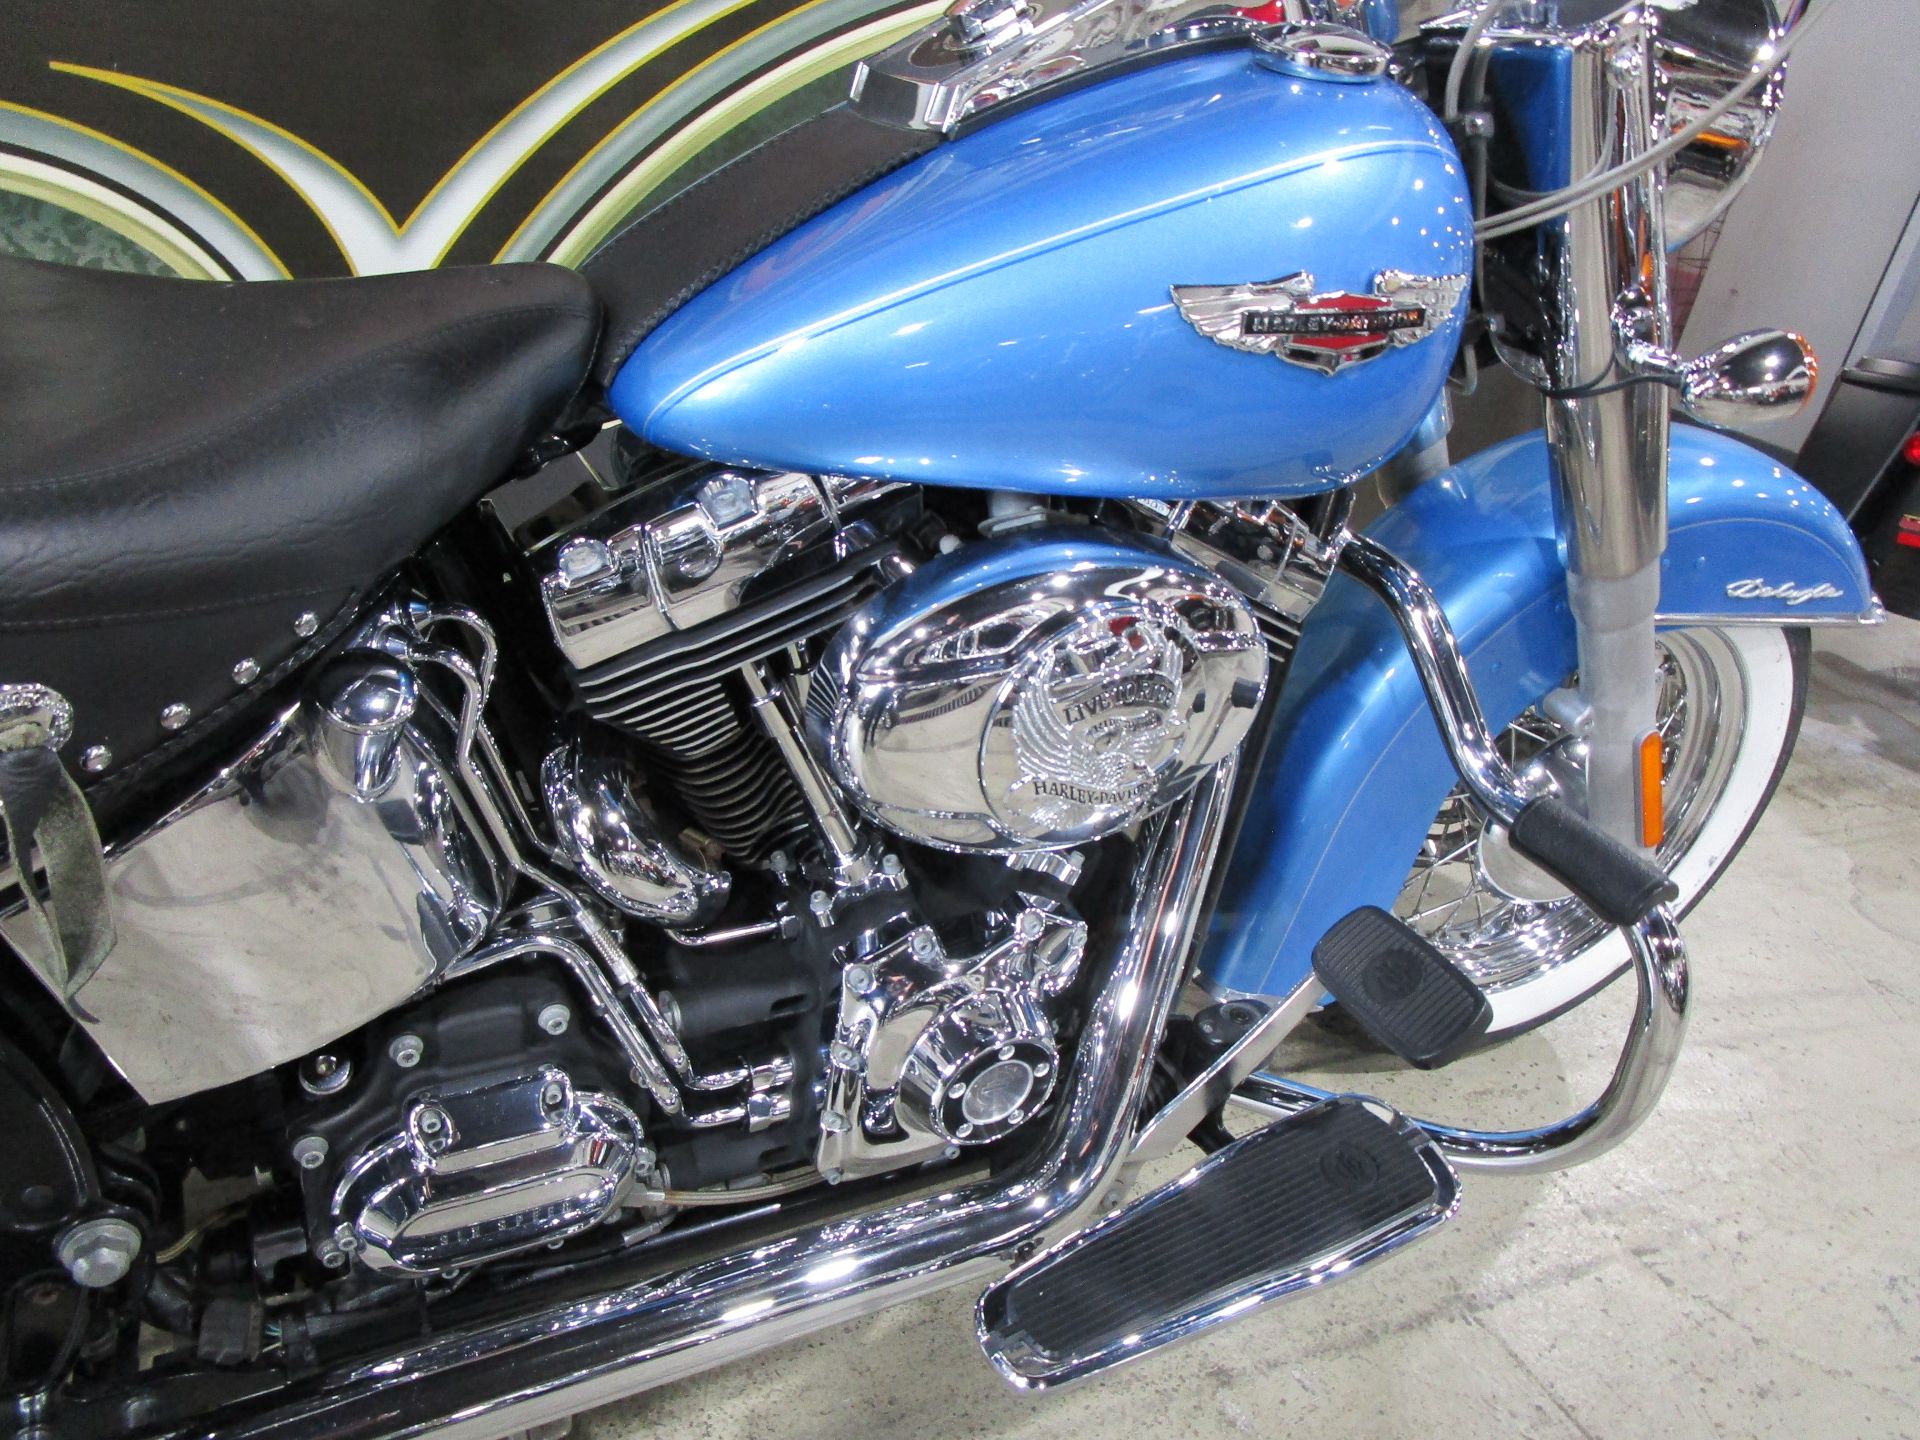 2011 Harley-Davidson Softail® Deluxe in South Saint Paul, Minnesota - Photo 7